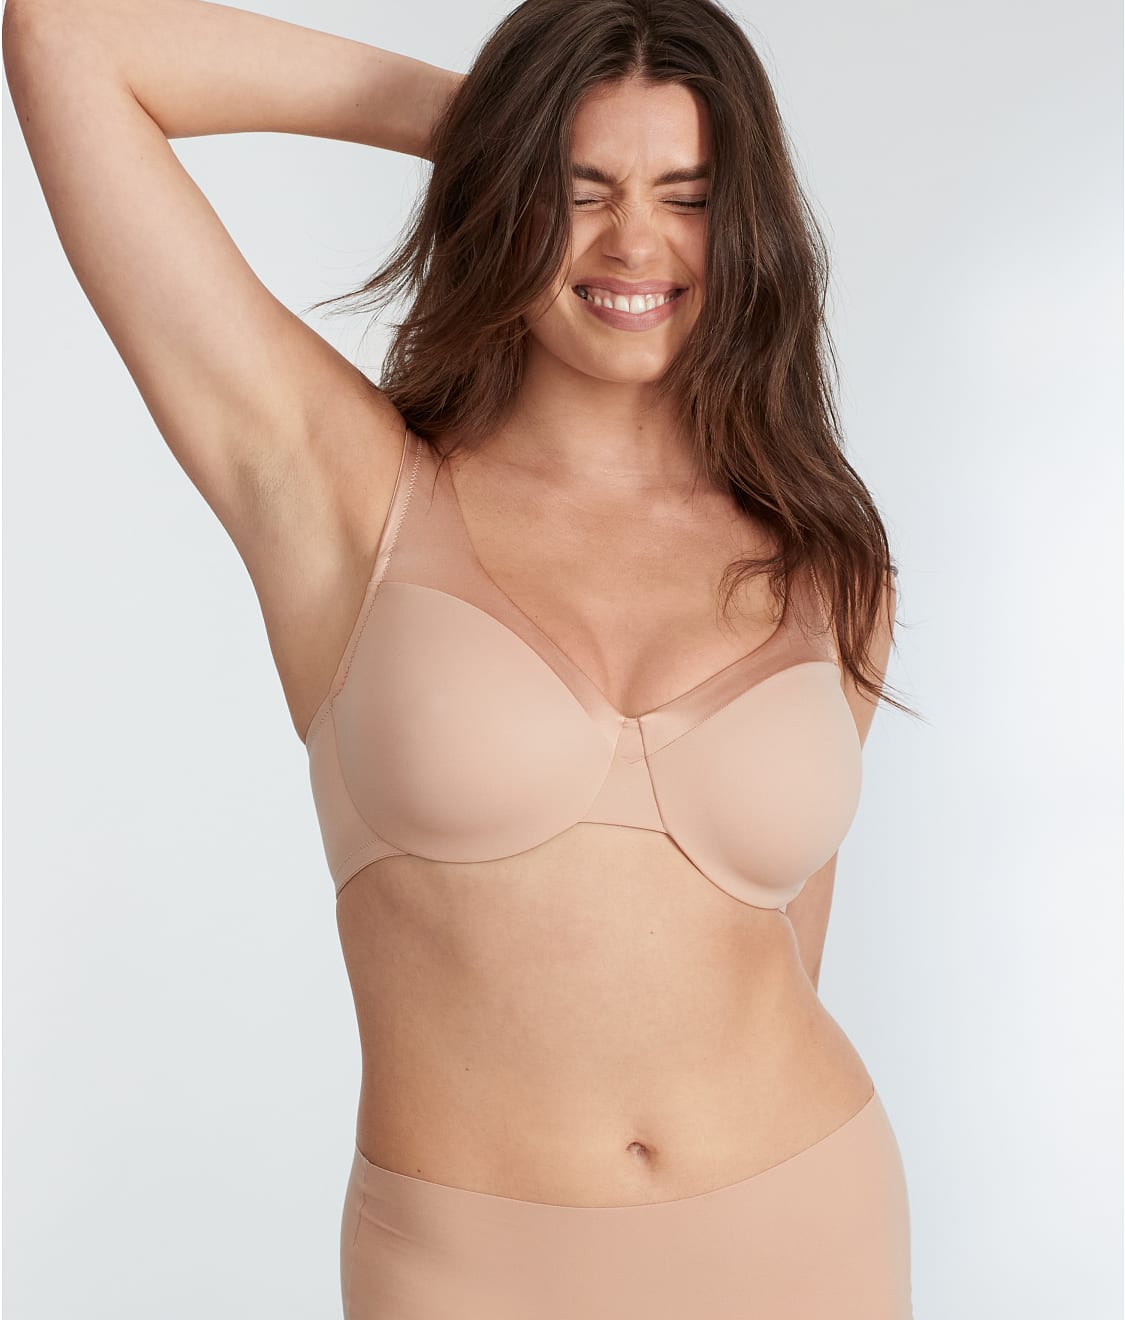 Bra fitting expert reveals the secret to discovering your true cup